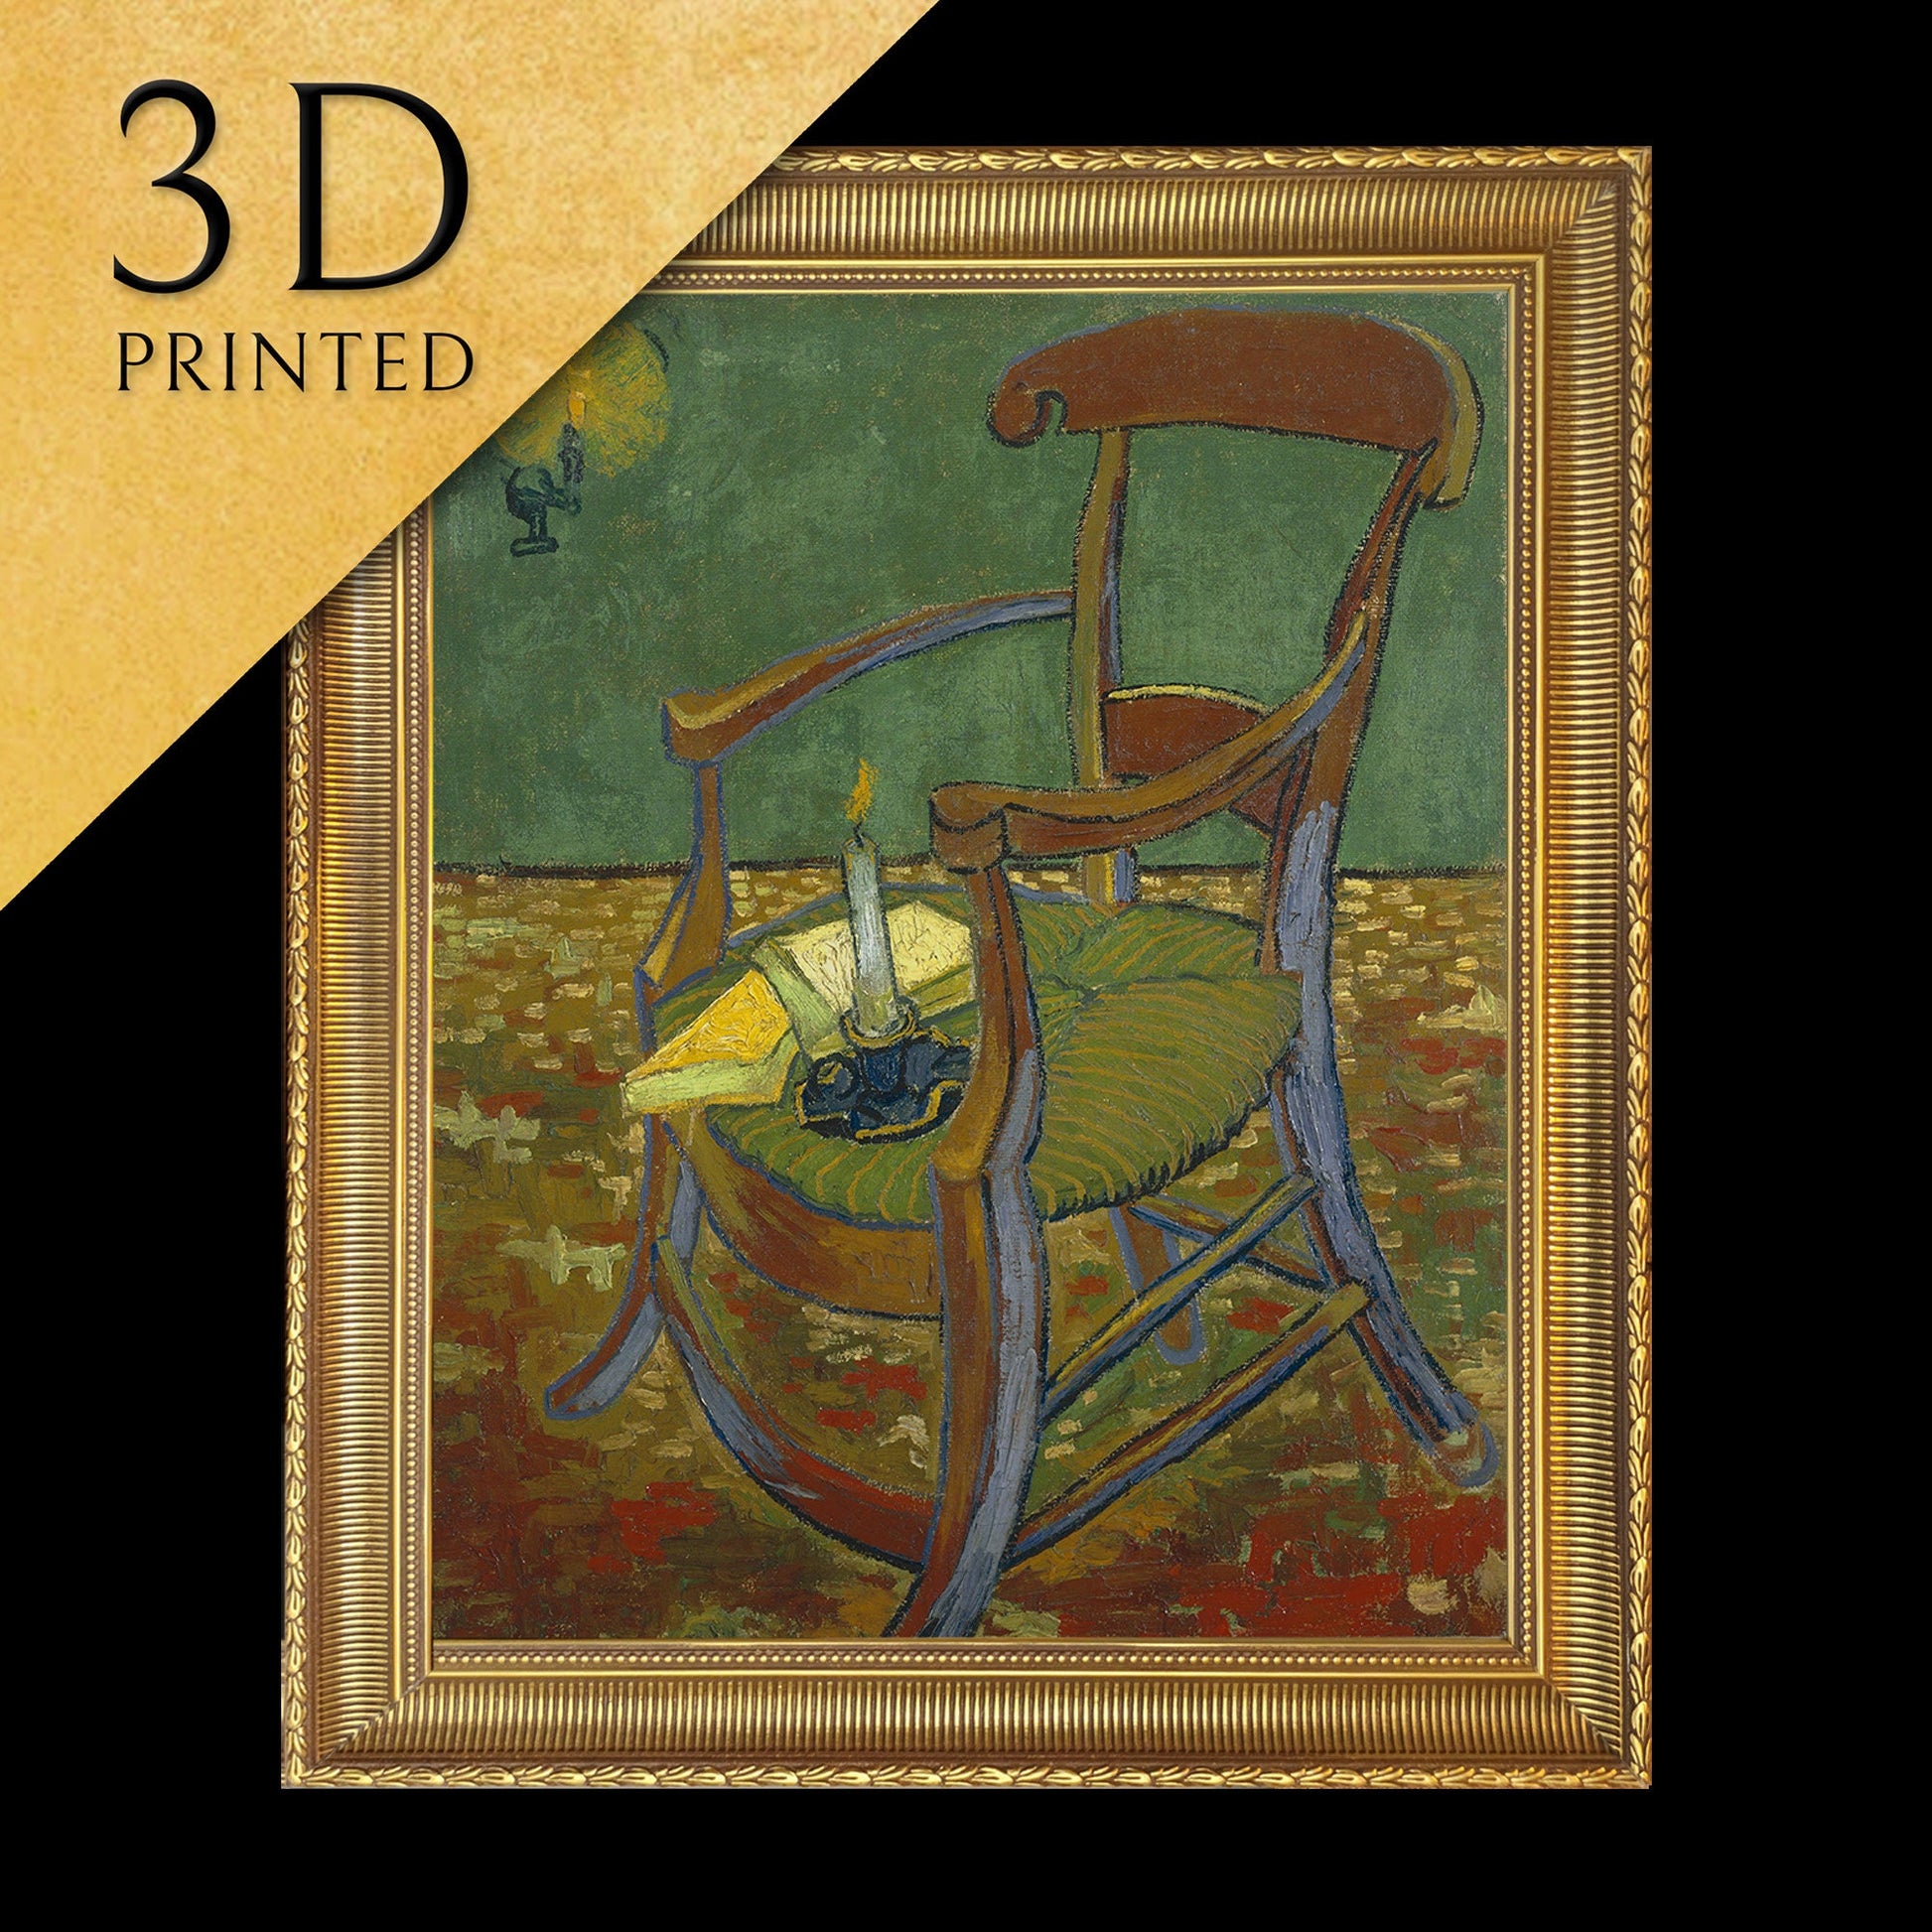 Gauguin's chair by Vincent van Gogh, 3d Printed with texture and brush strokes looks like original oil-painting, code:380